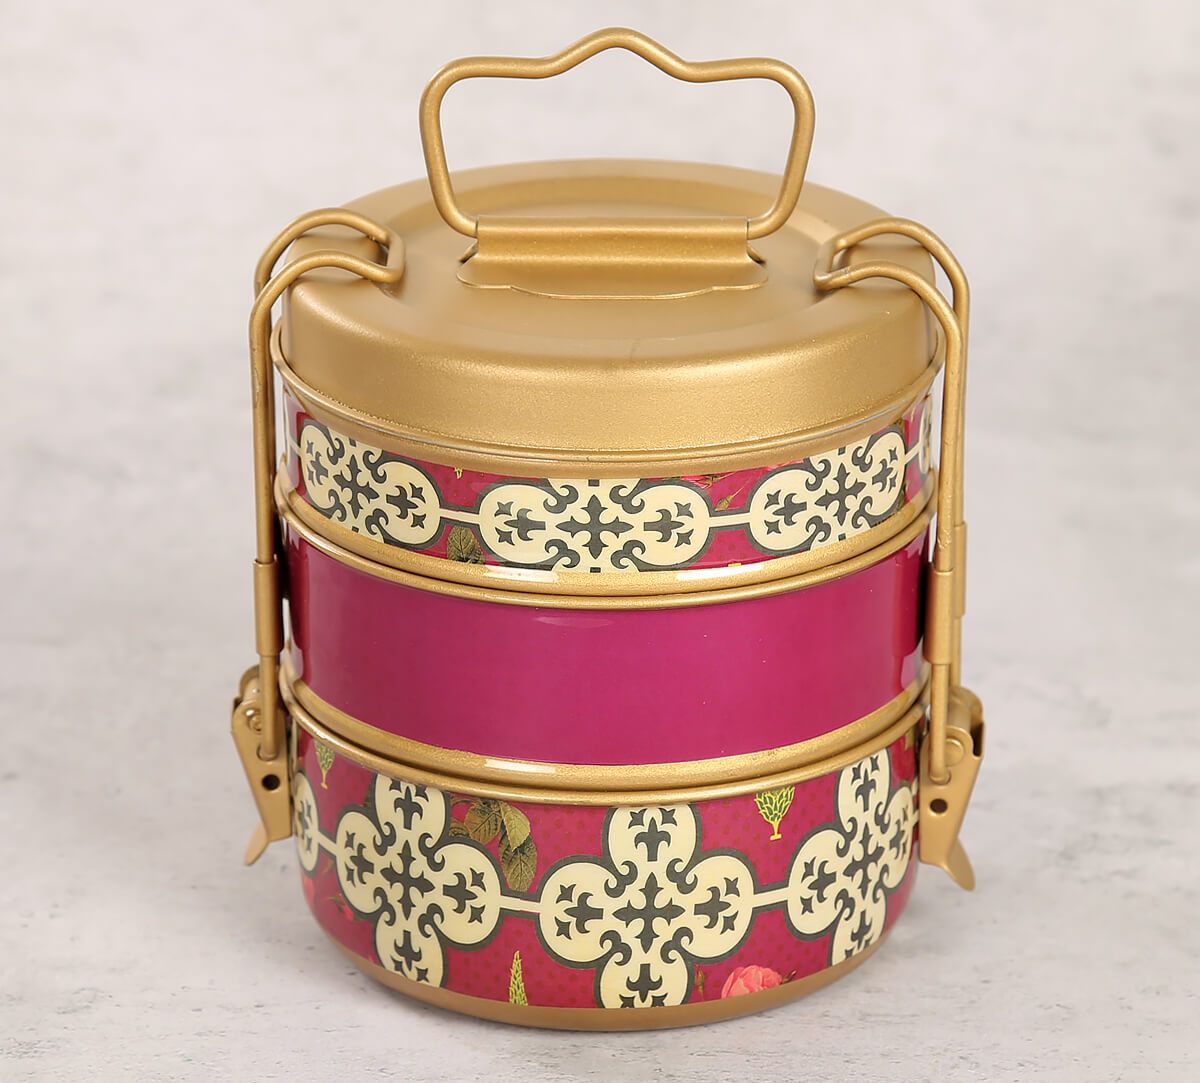 India Circus by Krsnaa Mehta Clover's Knotty Play Lunch Box